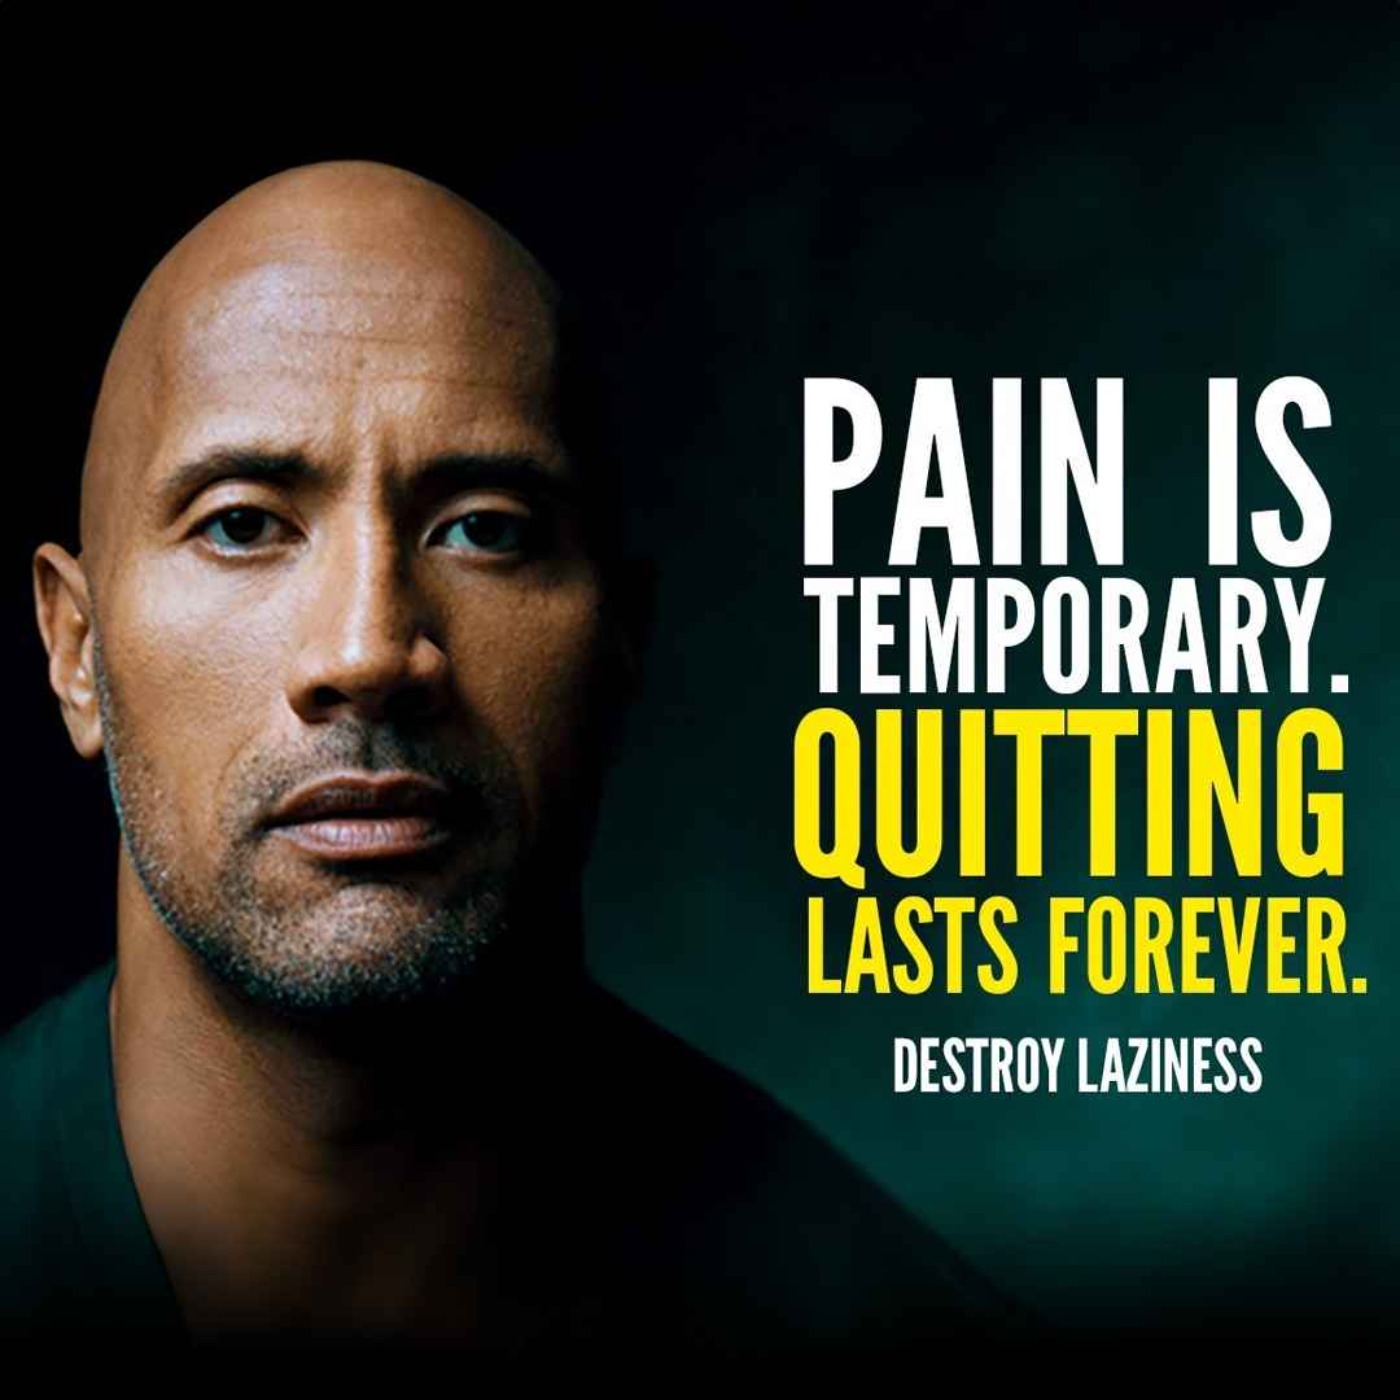 PAIN IS TEMPORARY - Motivational Speech Compilation